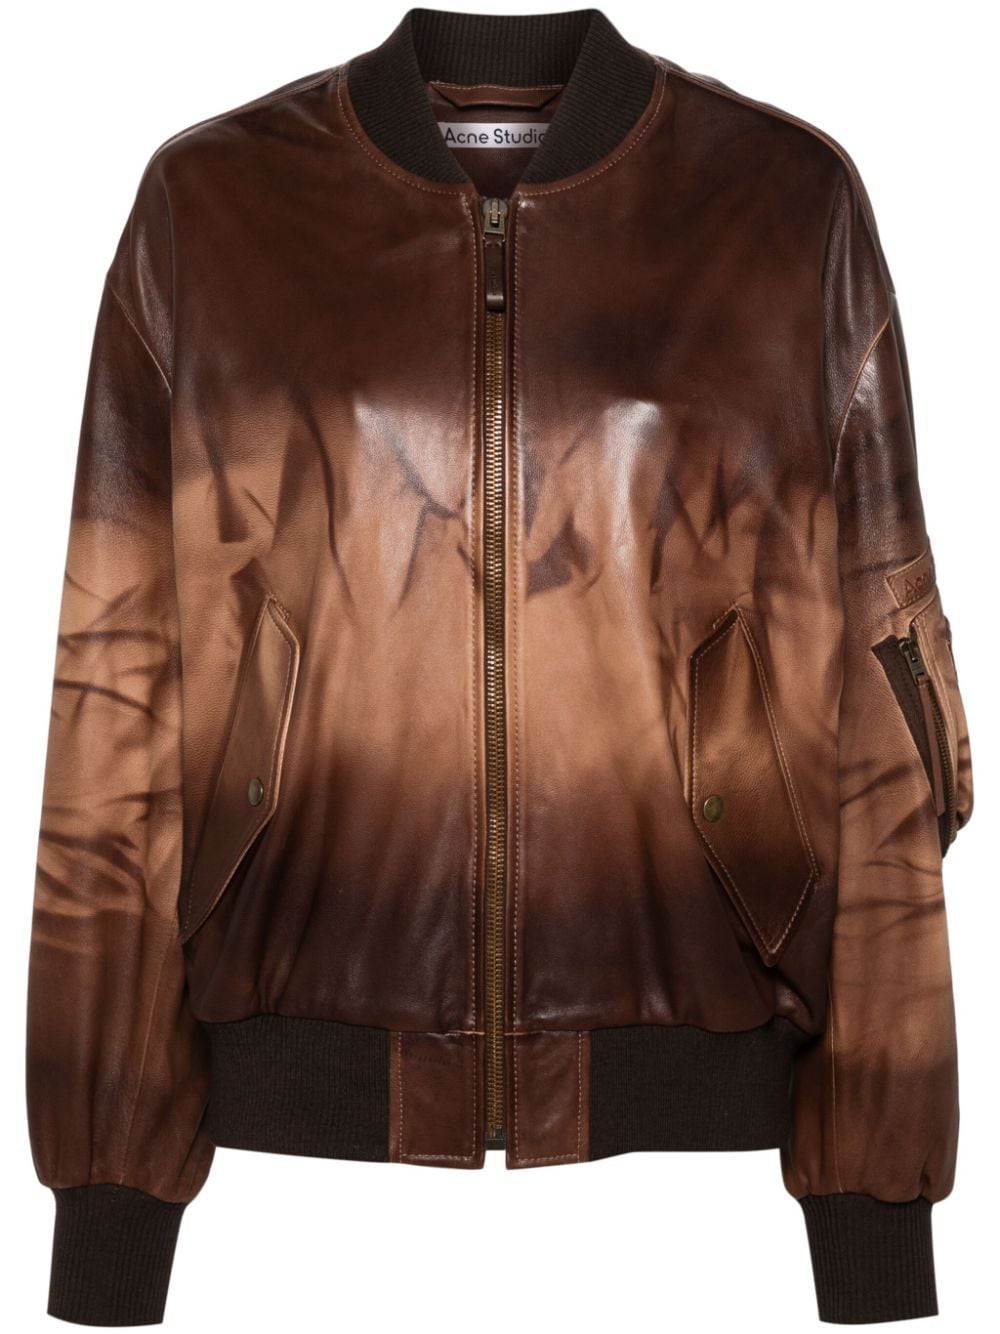 Acne Studios Leather Bomber Jacket In Brown